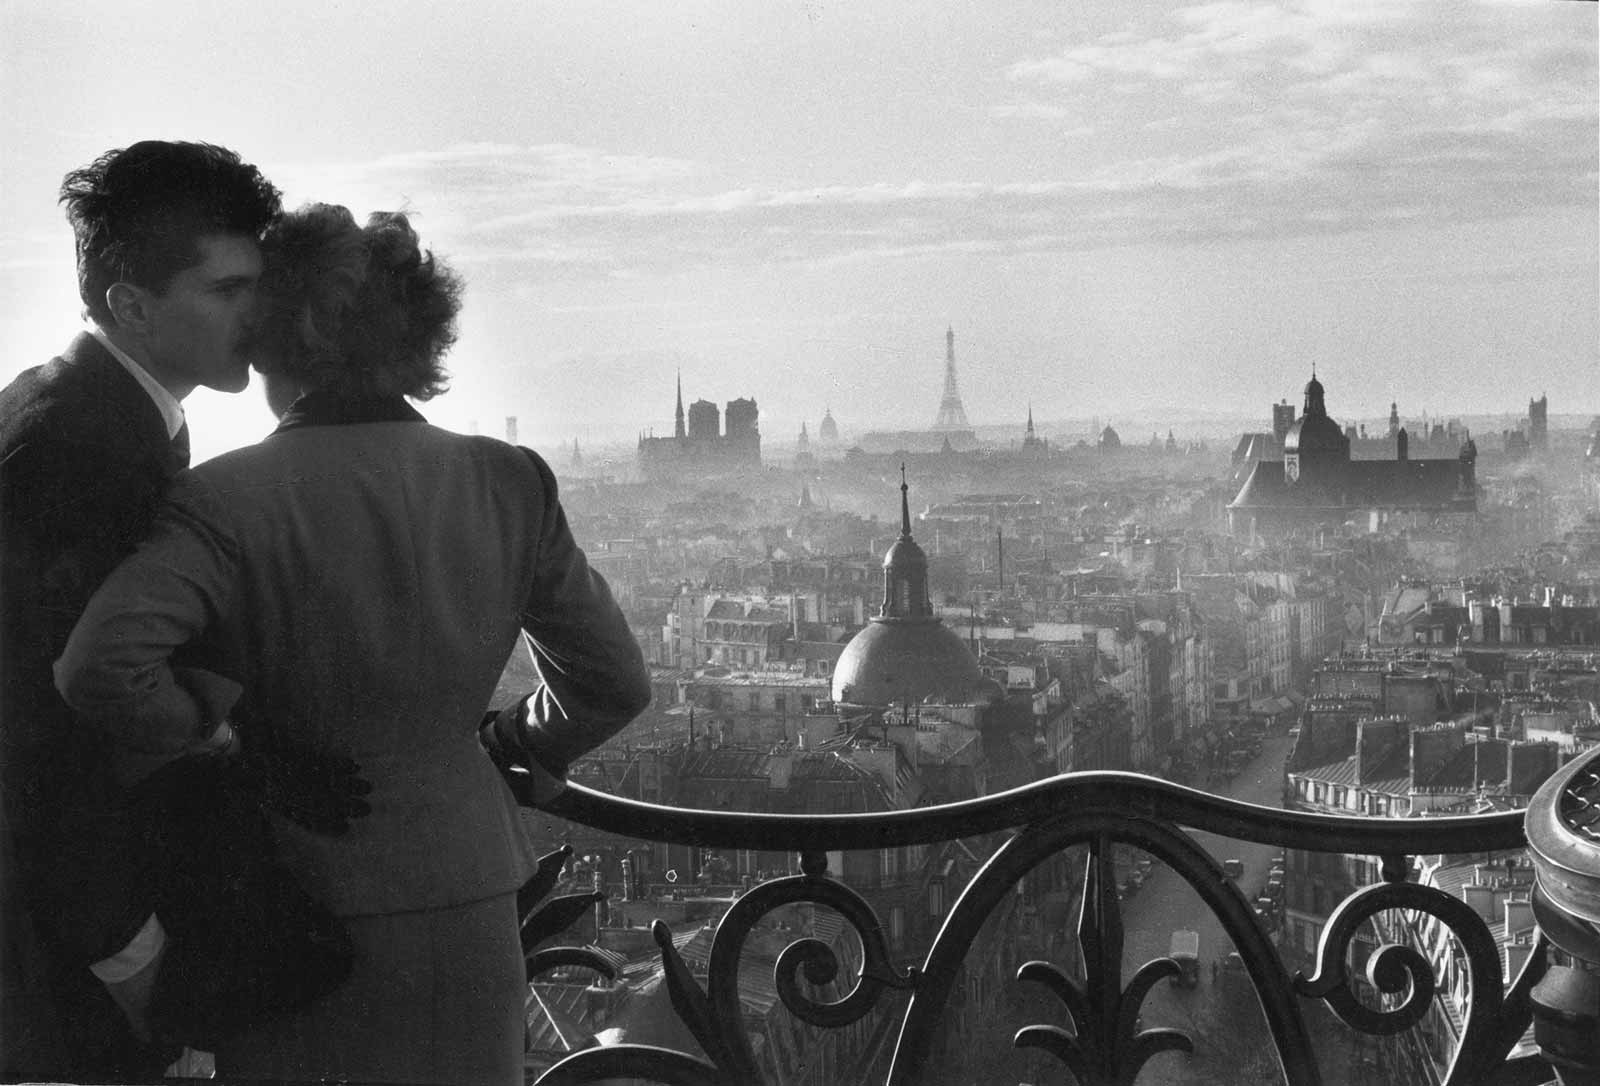 Willy Ronis: The Bastille Lovers, Paris, 1957
